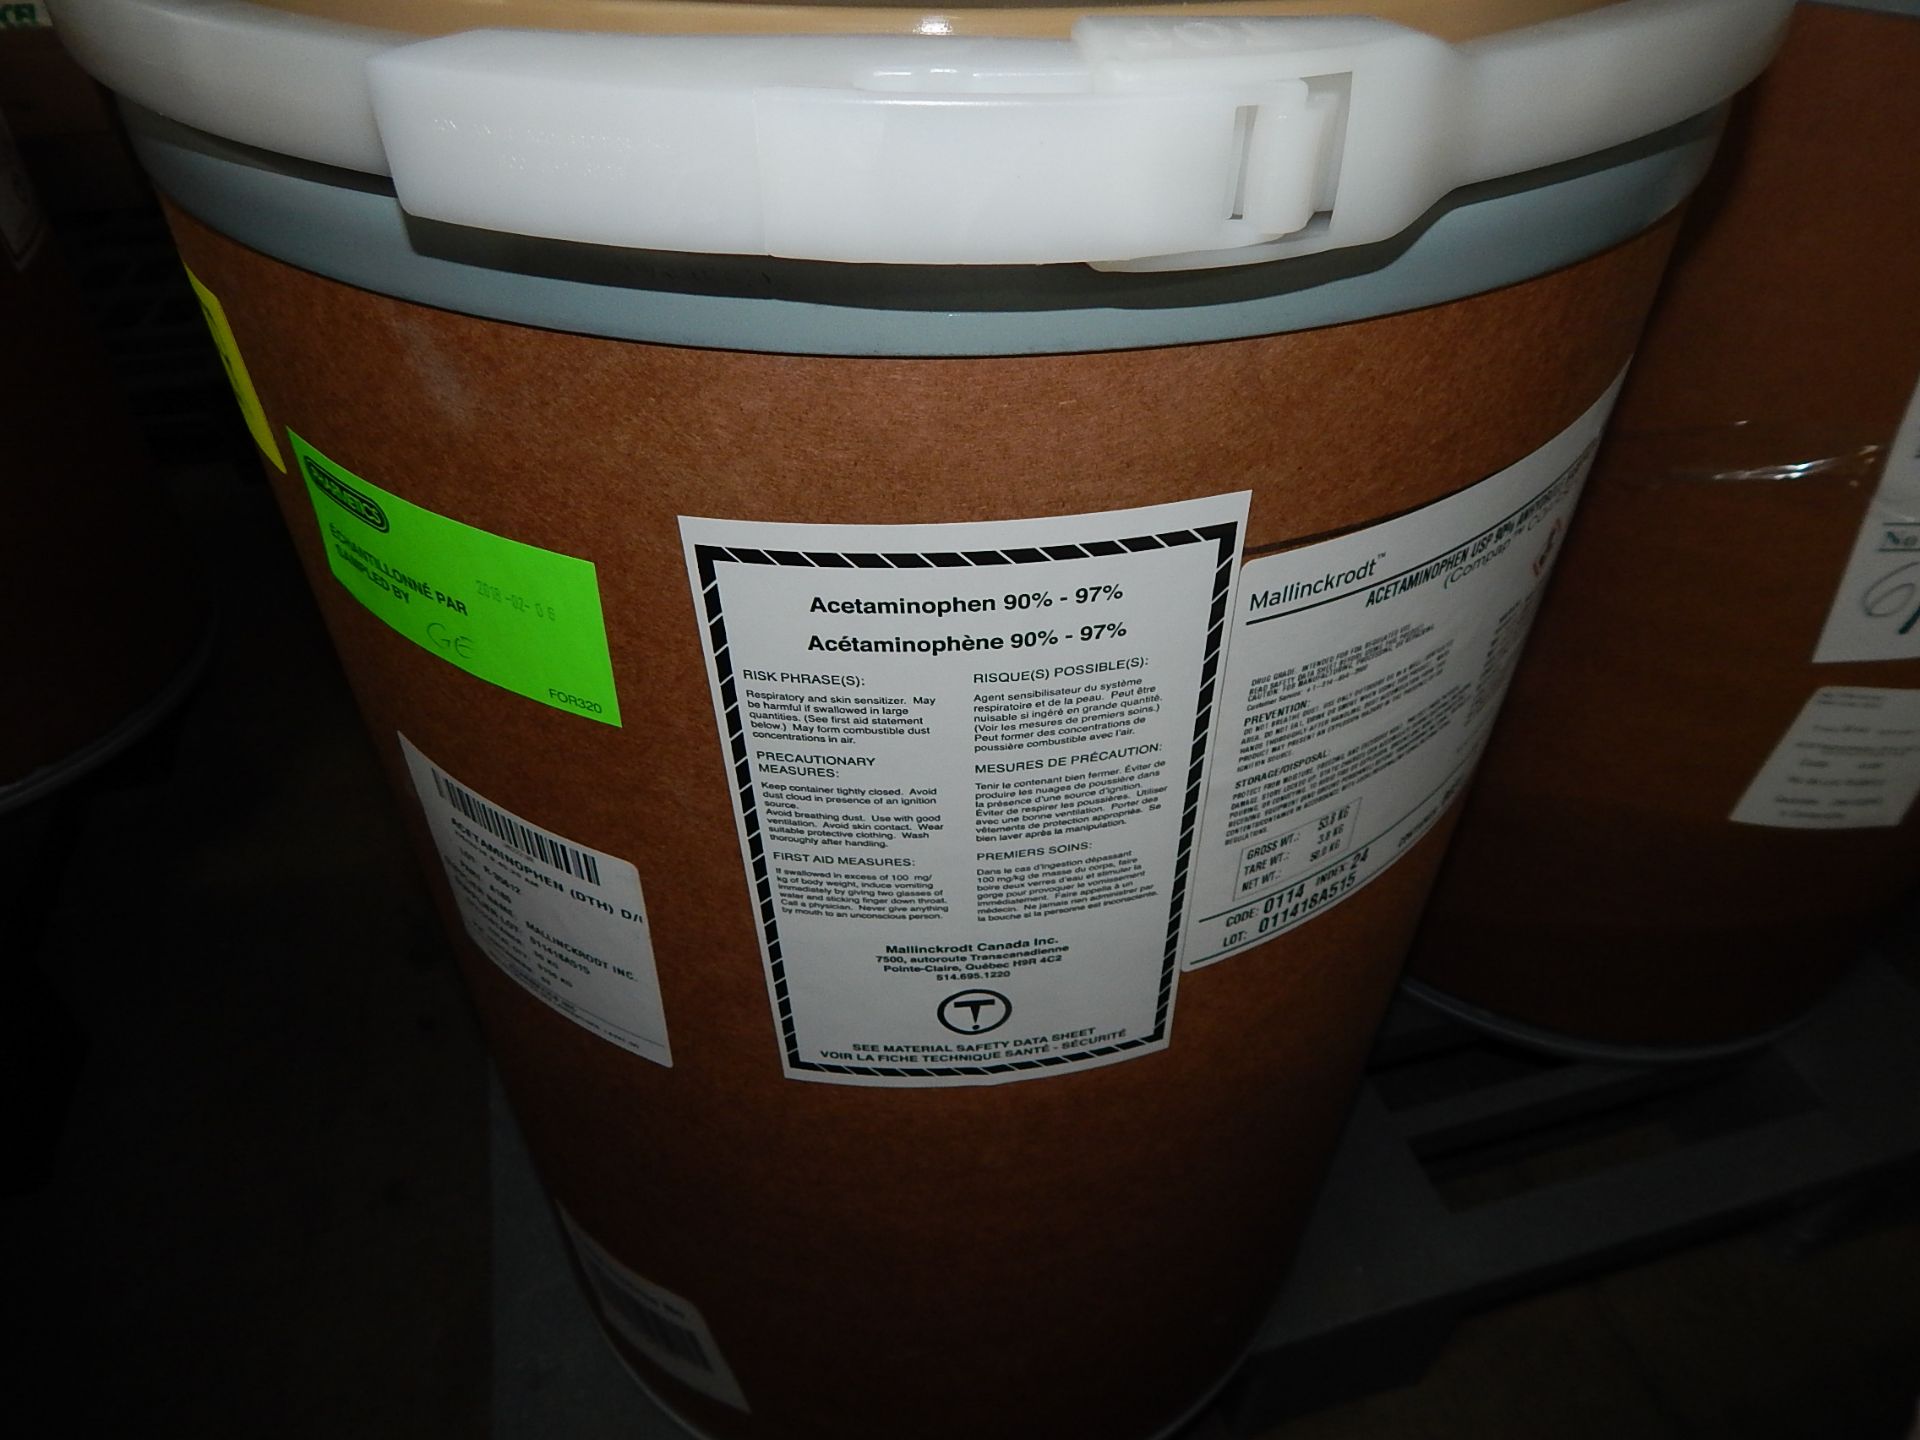 LOT/ SKID WITH CONTENTS CONSISTING OF 50KG DRUMS OF ACETAMINOPHEN - Image 2 of 2